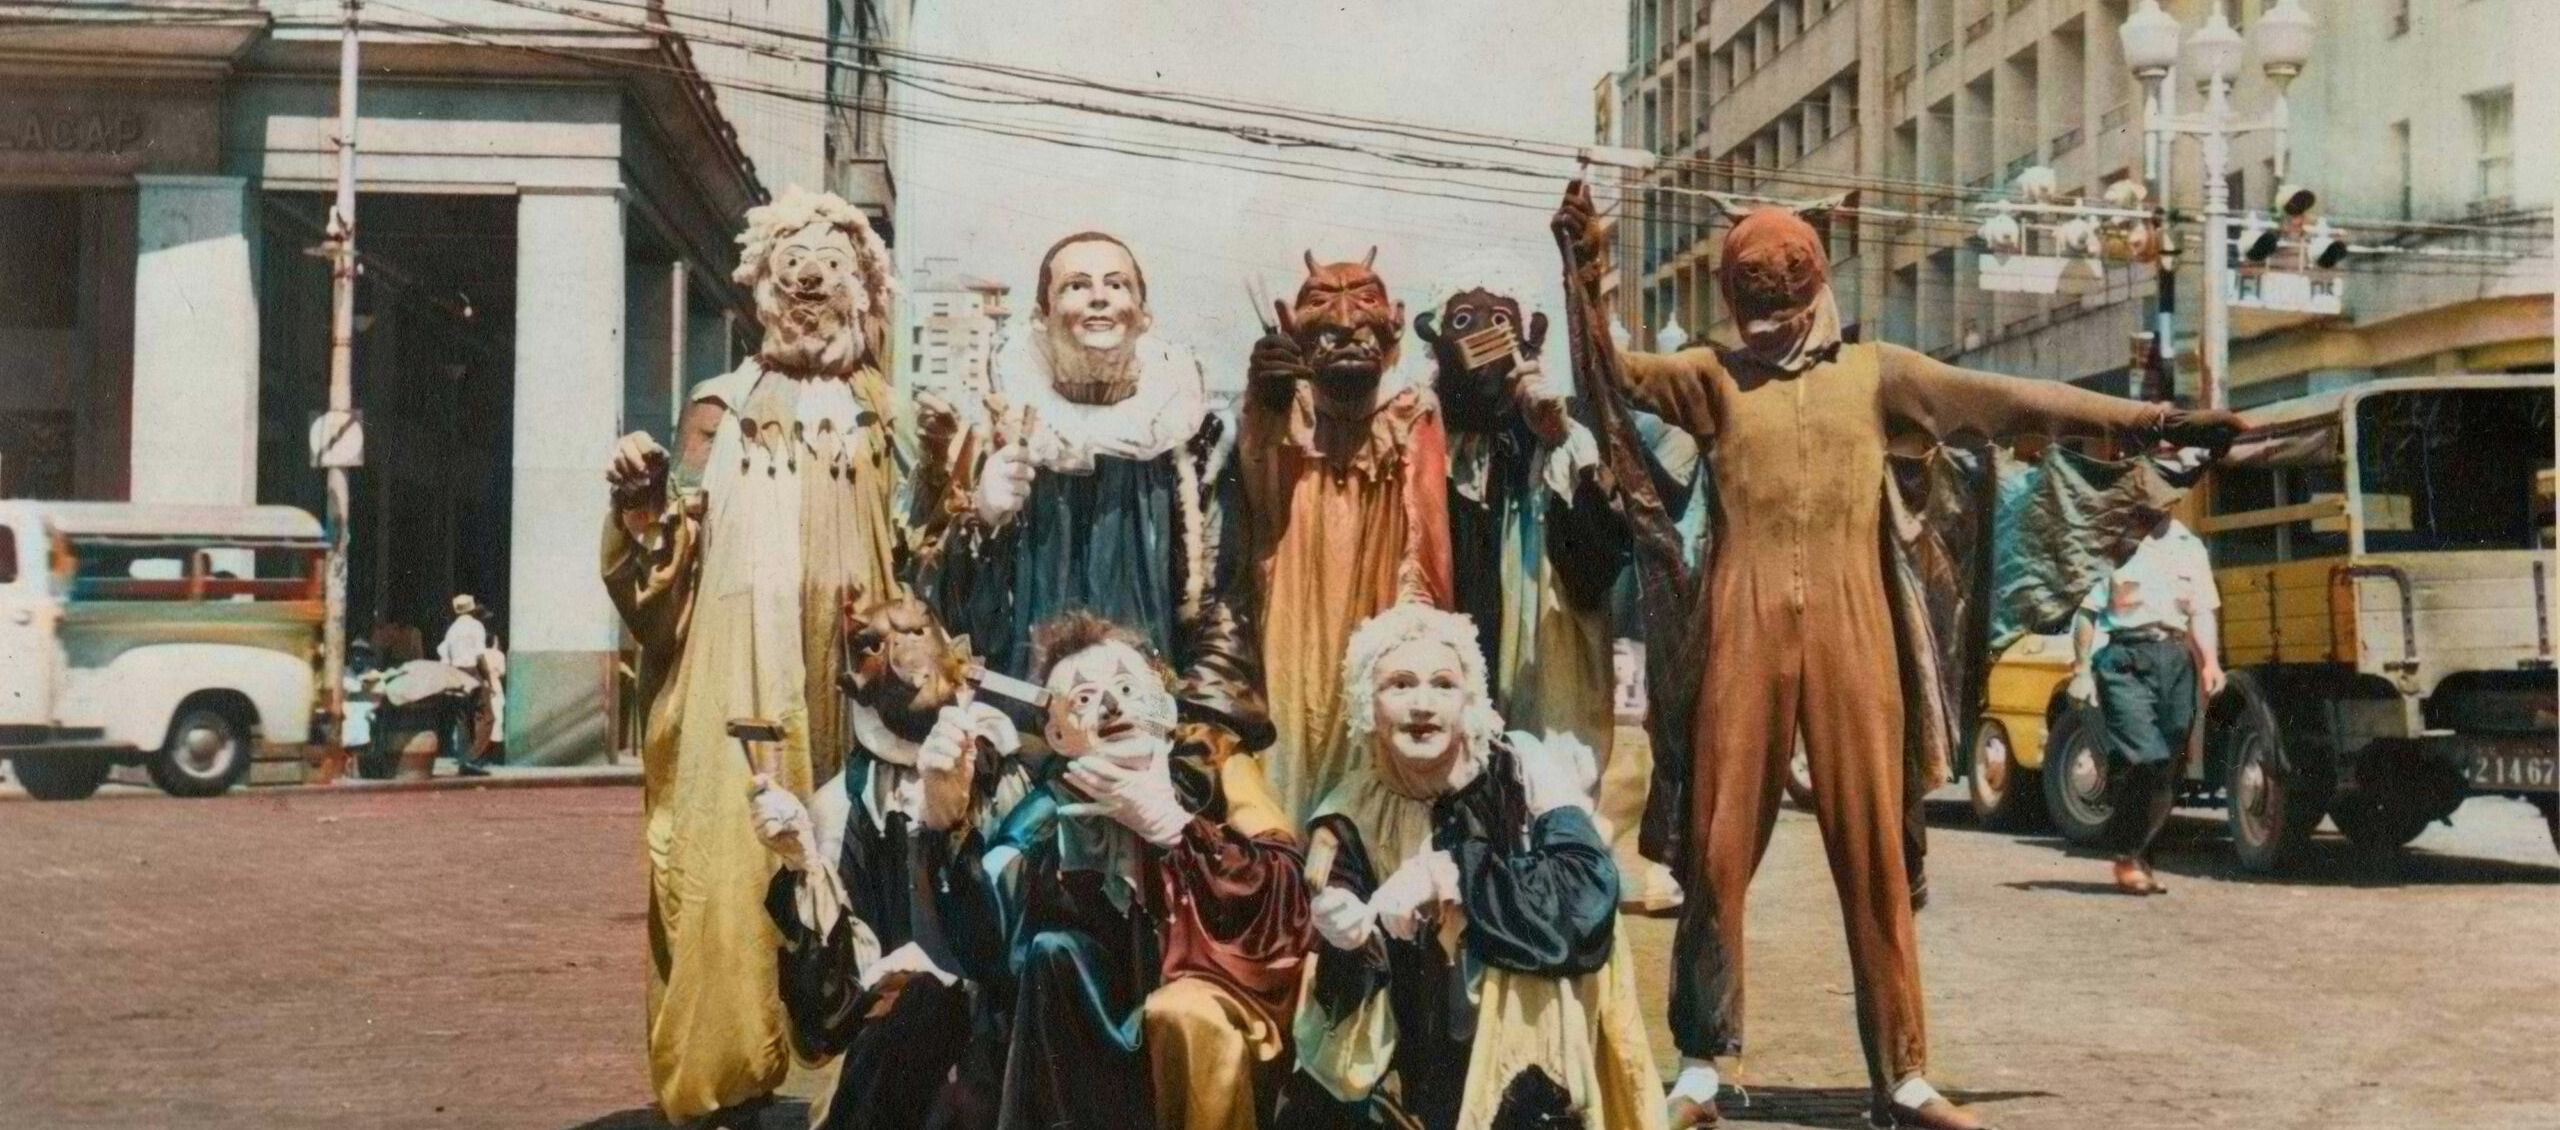 An old color photograph of a group of people in costume, all wearing different masks.